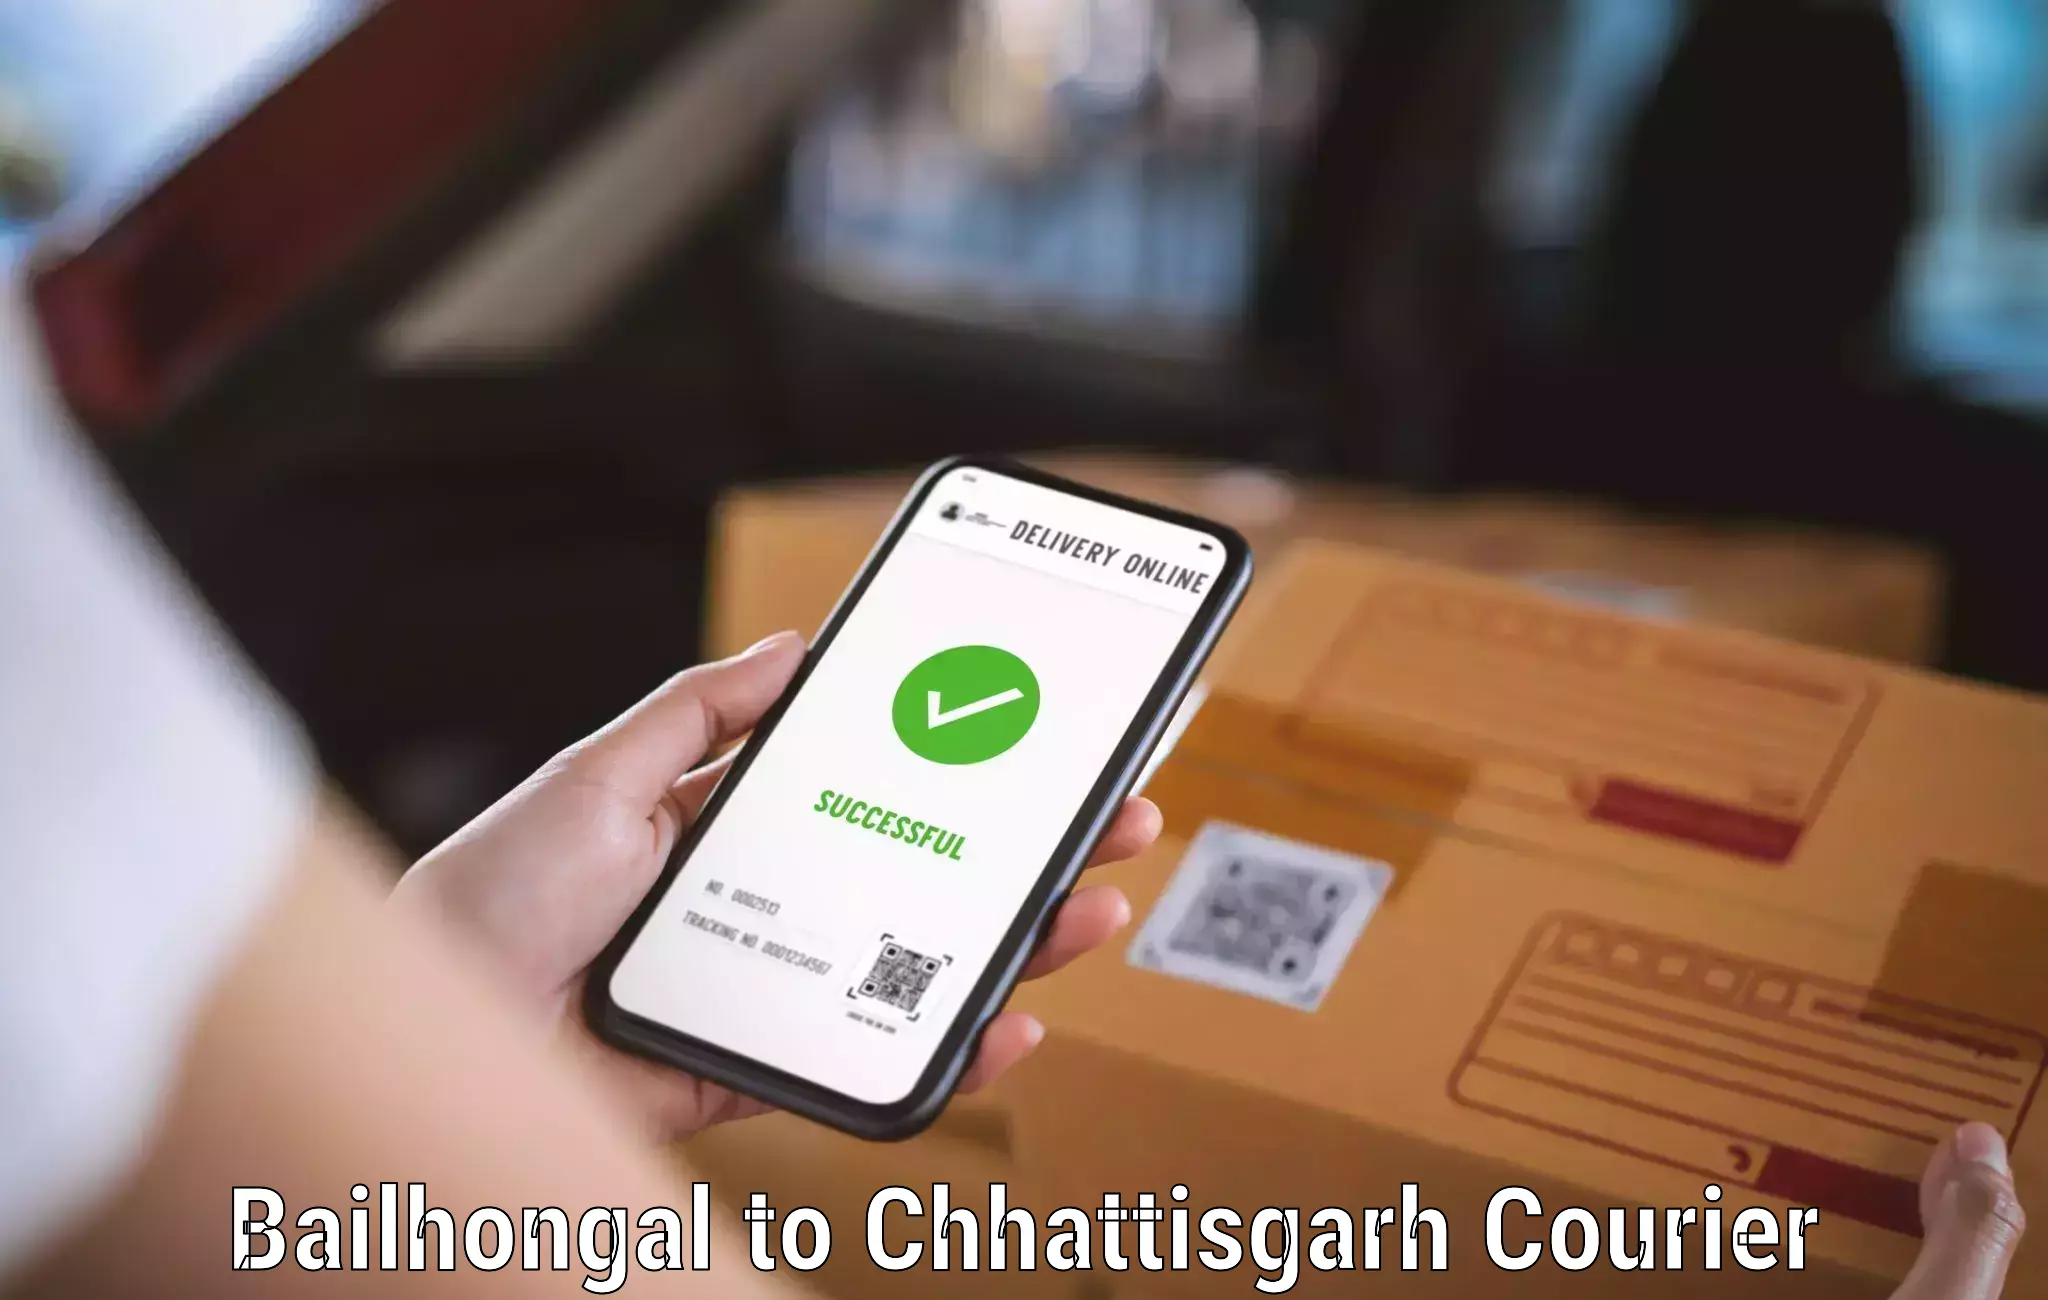 Express delivery capabilities in Bailhongal to Patna Chhattisgarh